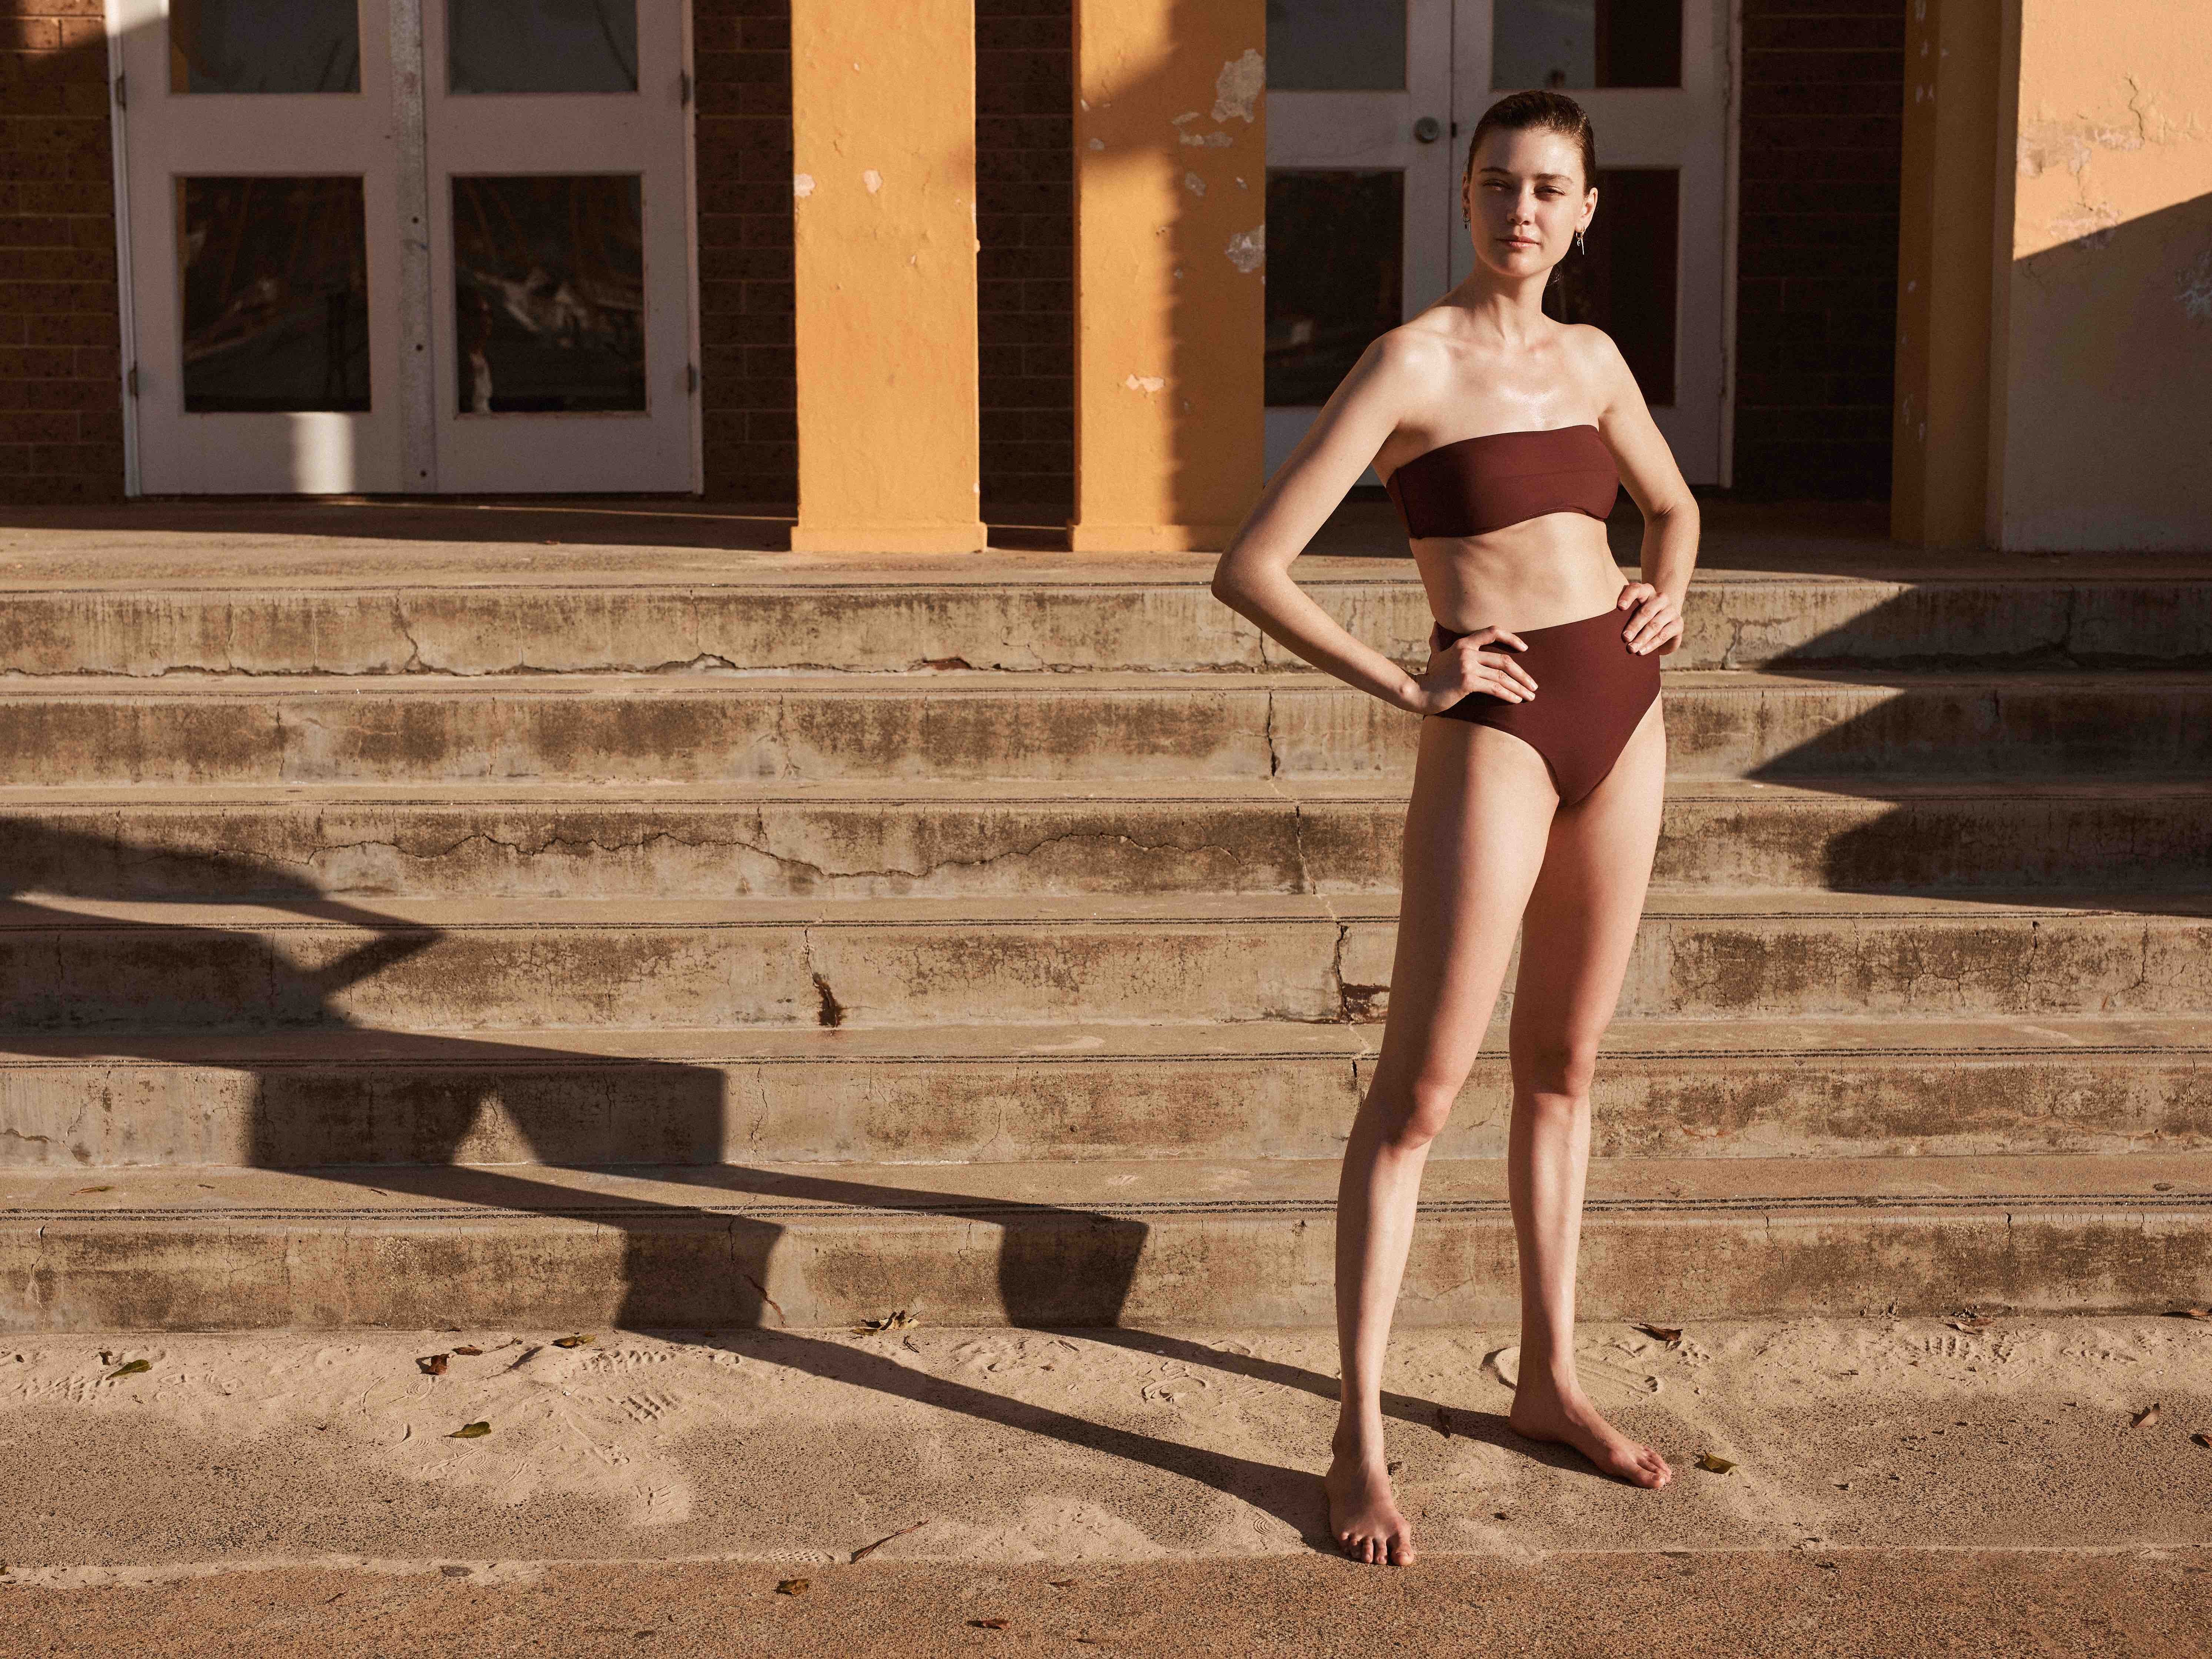 An outfit from emerging luxury brand Bondi Born’s swimwear range, which will be on show at the Mercedes-Benz Fashion Week Australia in Sydney, Australia.